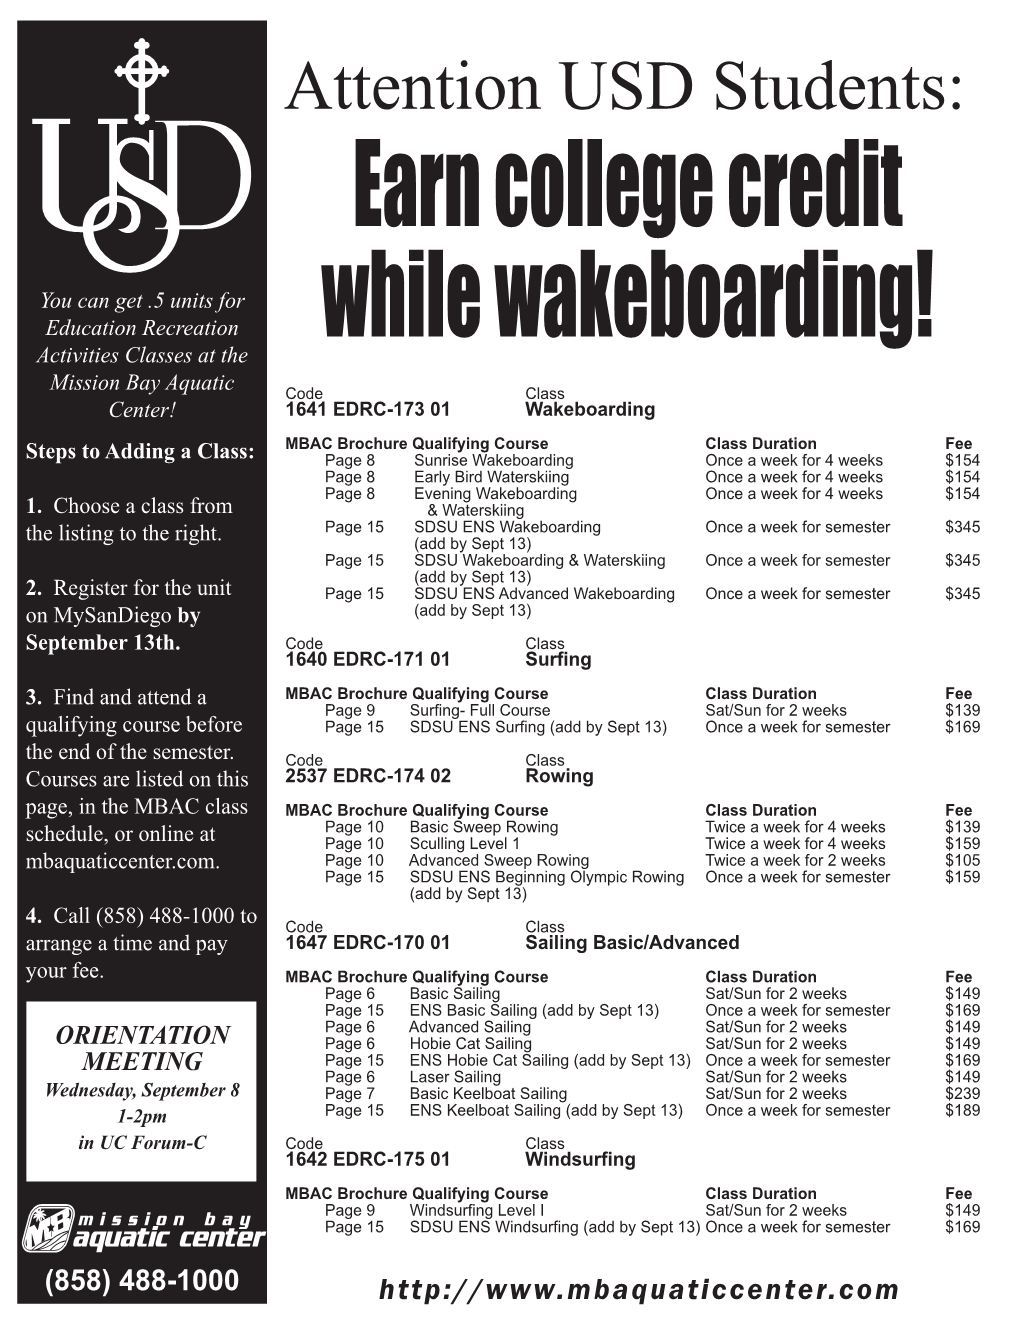 Earn College Credit While Wakeboarding!